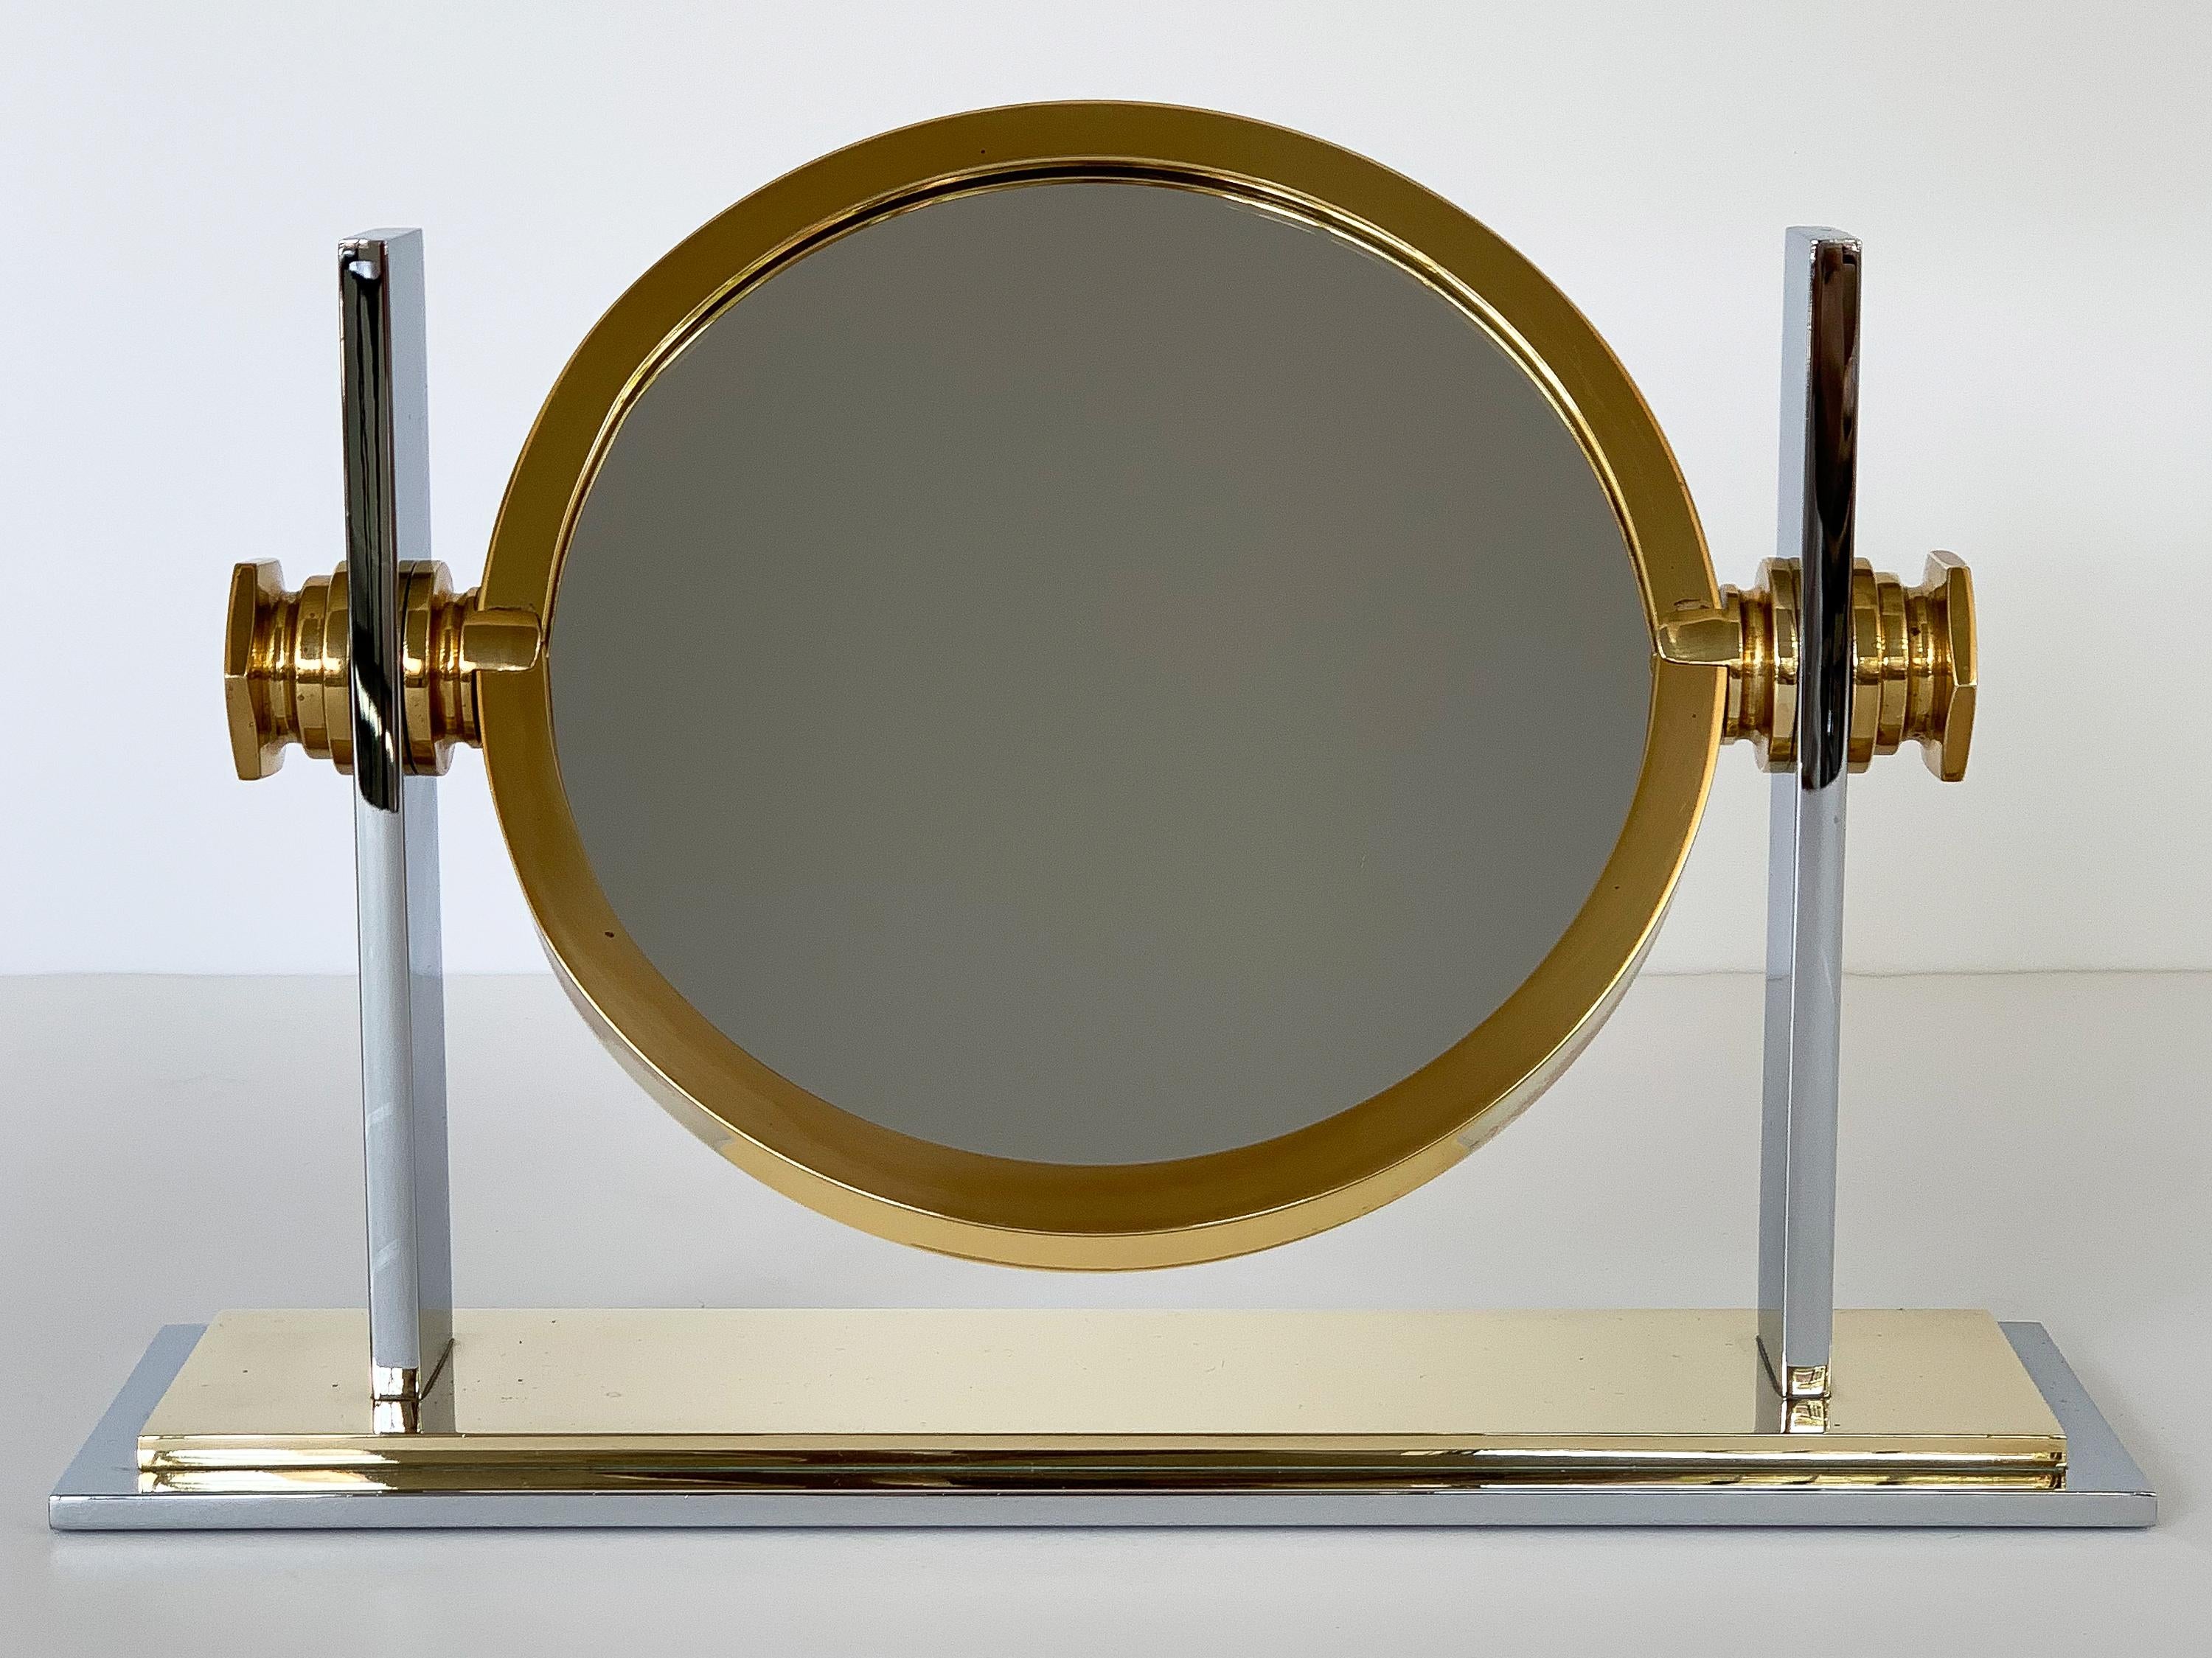 A brass and polished nickel tabletop vanity mirror designed by Karl Springer, circa 1980s. Smaller scale model with an 8.5 inch brass framed round mirror. The mirror is a adjustable. The mirror can be tilted and rotated for choice of mirror. One